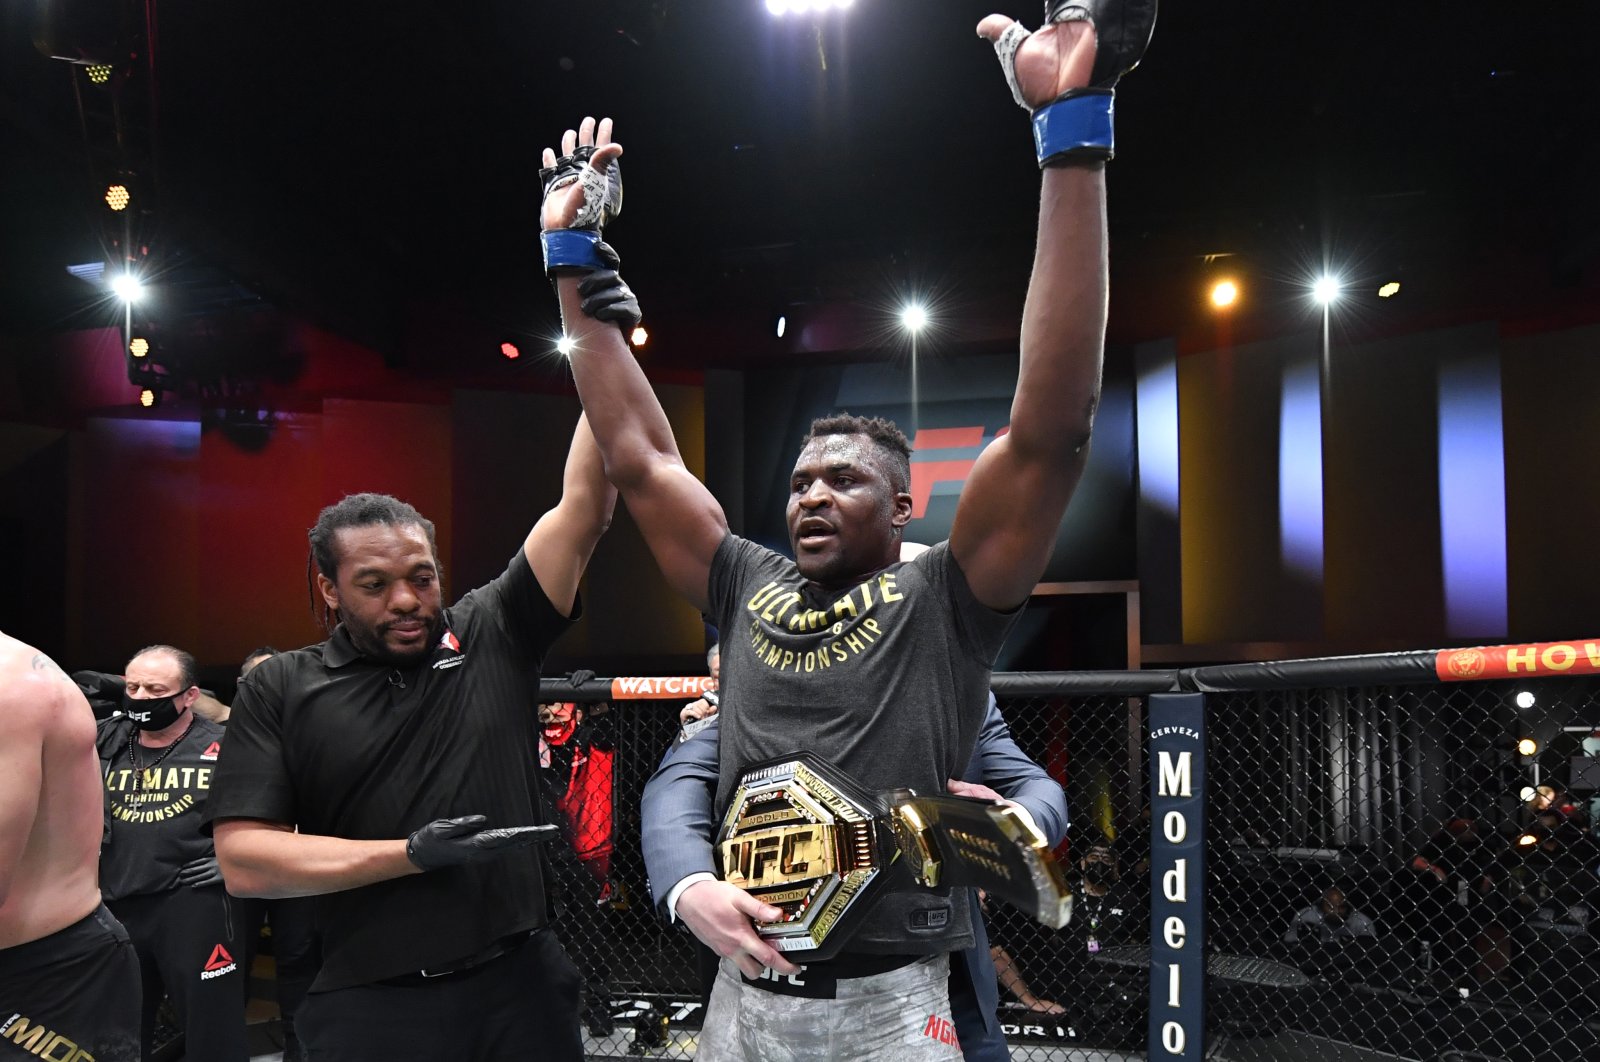 Cameroon's Francis Ngannou celebrates after his victory over Stipe Miocic in their UFC heavyweight championship fight during the UFC 260, at UFC APEX, Las Vegas, Nevada, U.S., March 27, 2021 (Reuters Photo)